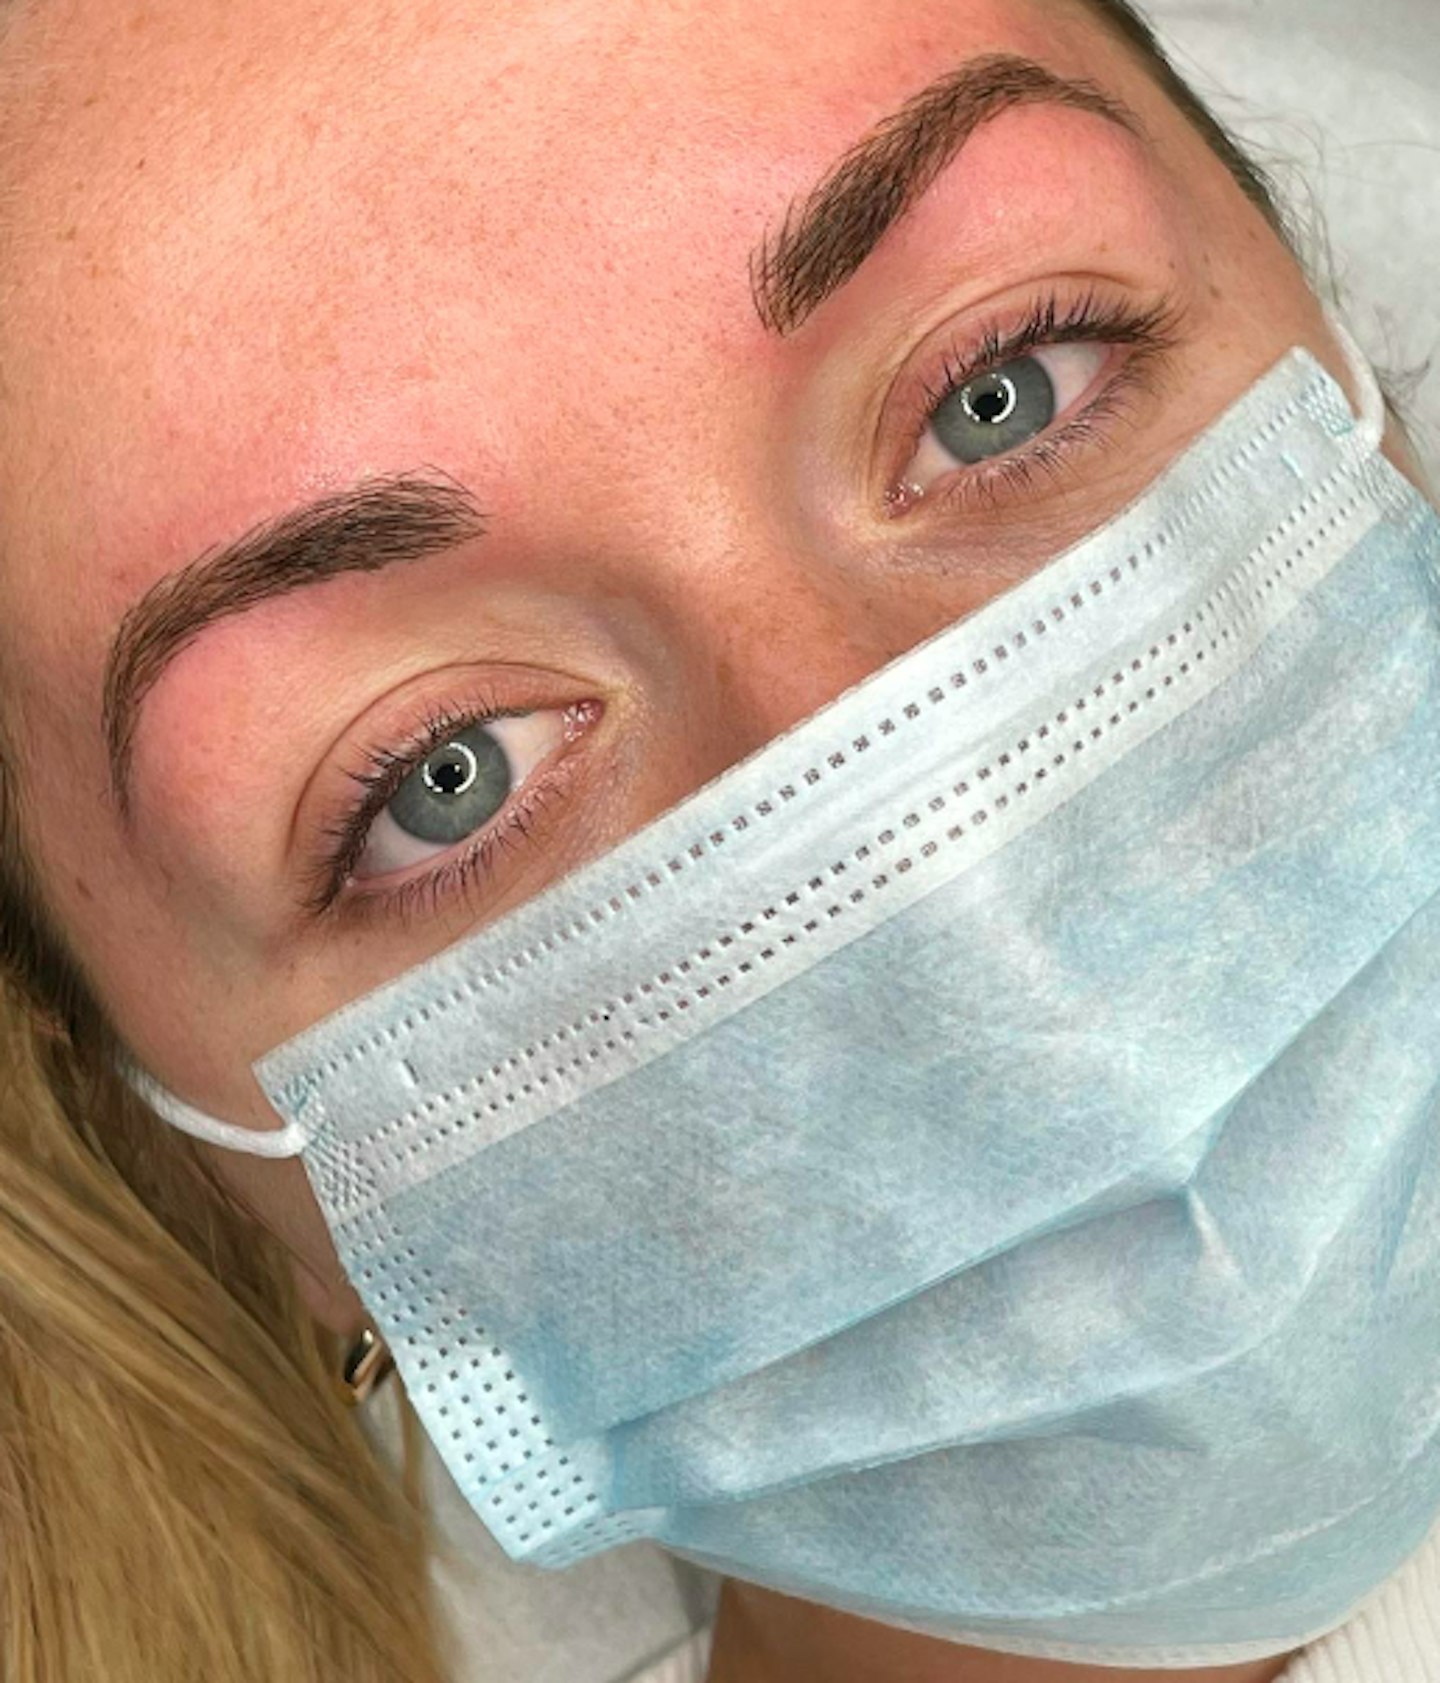 the finished result of microblading